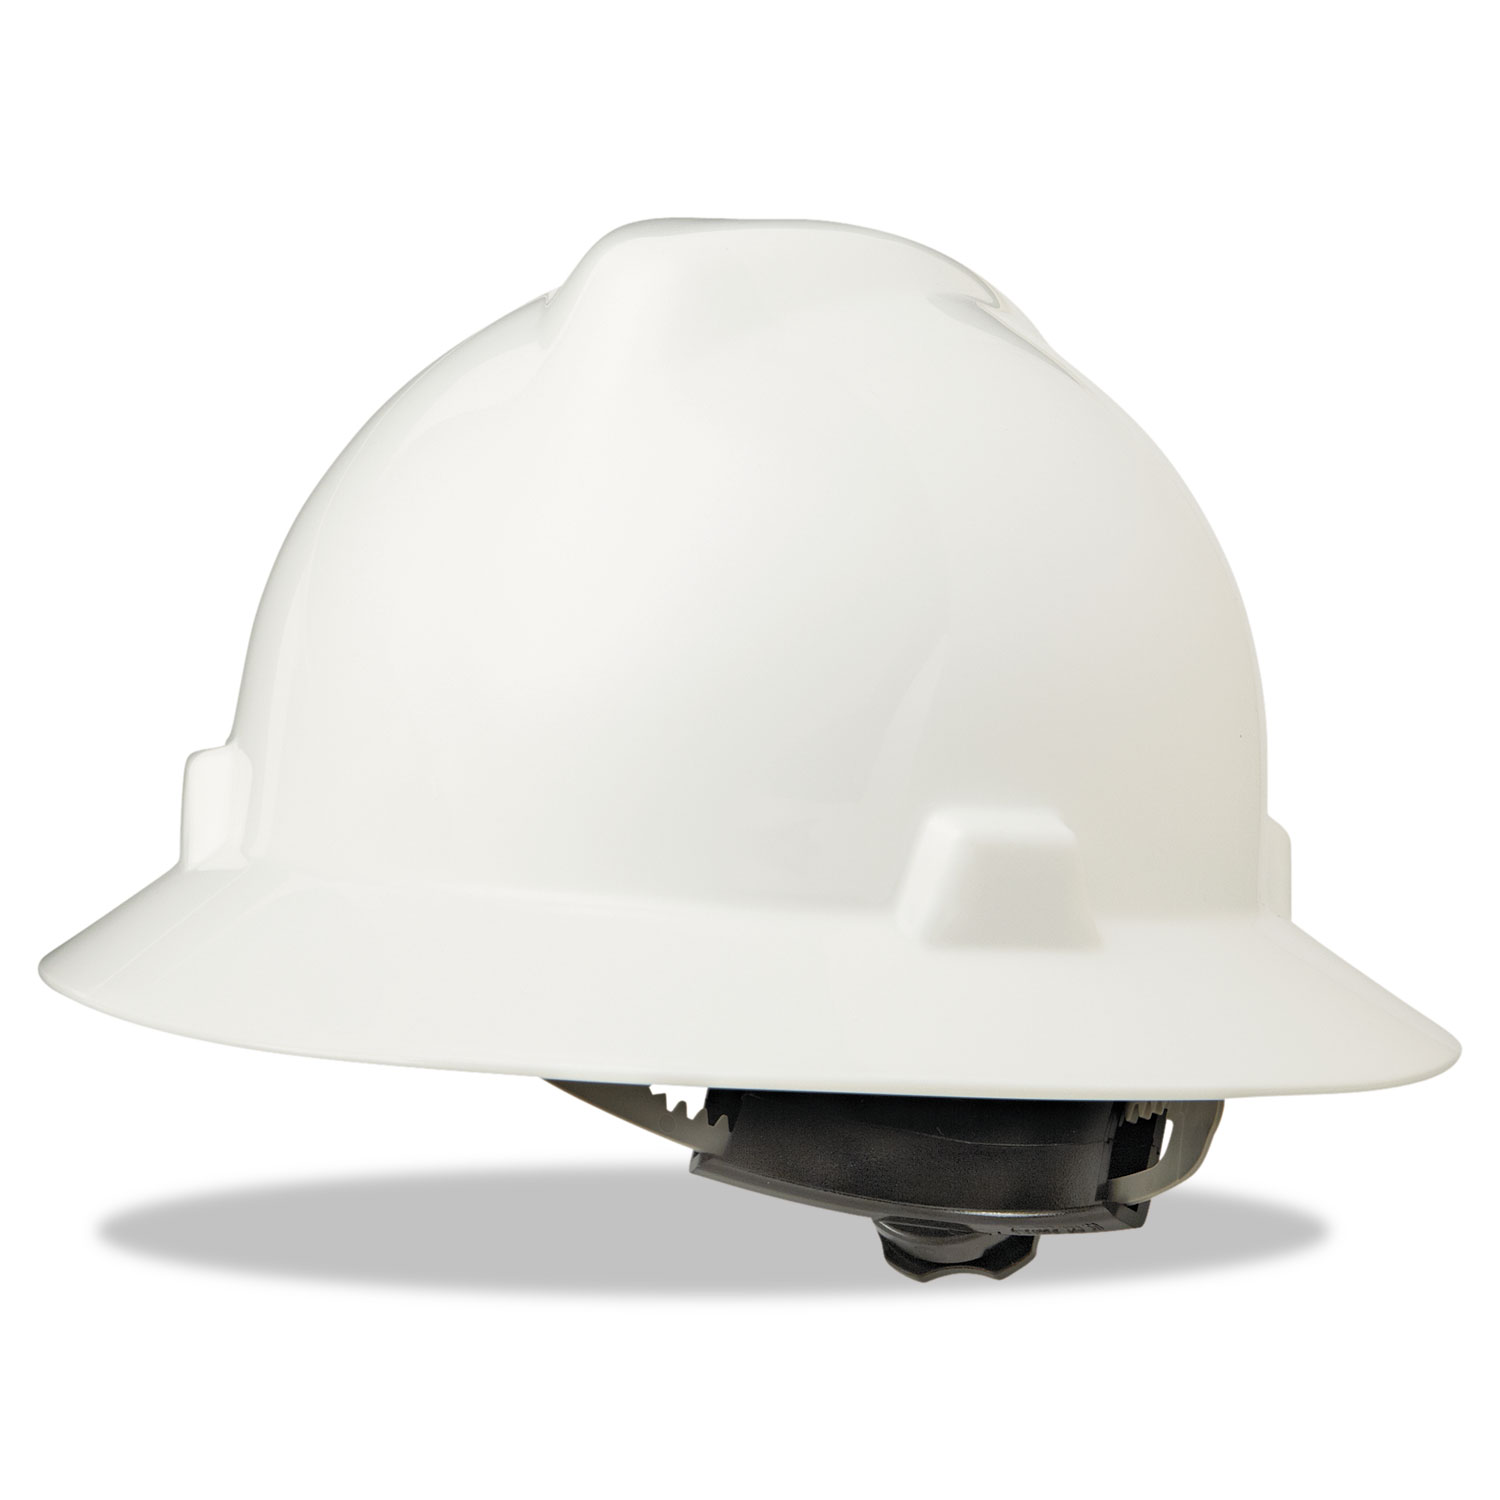 White Hard Hats with Fas-Trac Ratchet Suspension 641817003695 MSA475369 Size 6 1/2-8